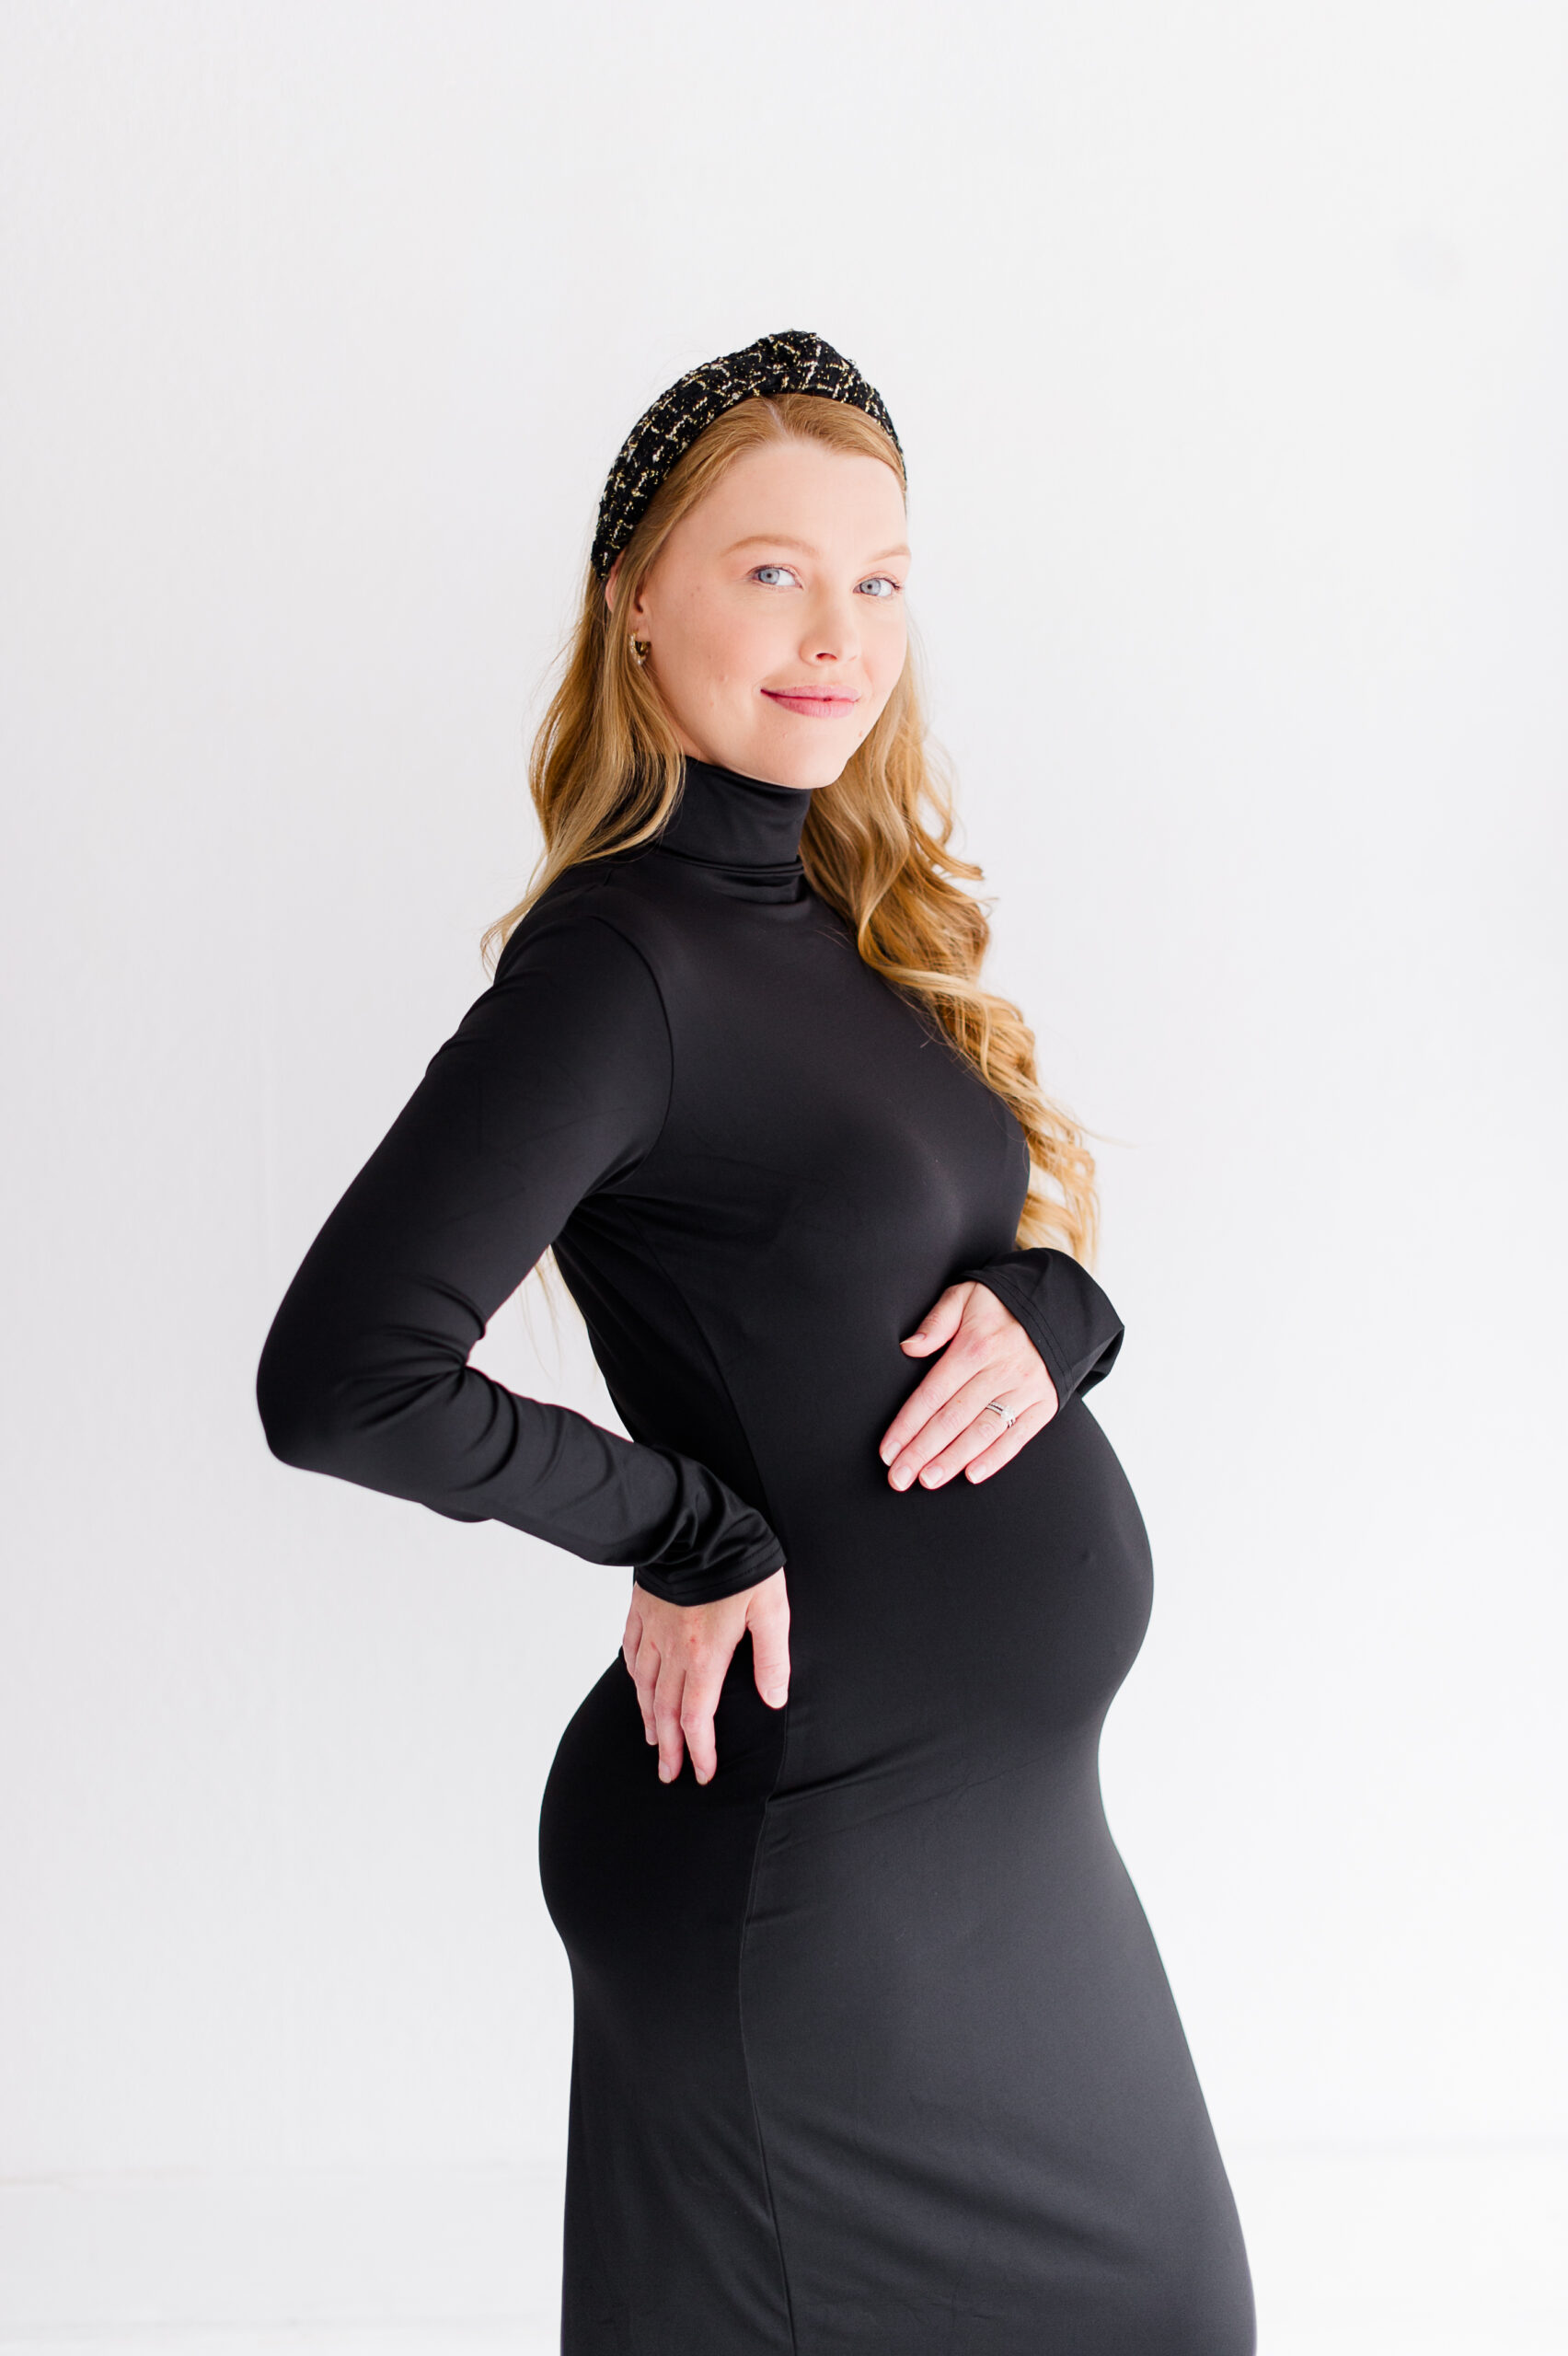 Stunning new mom holding her belly wearing all black longsleeve dress posing in a natural light studio in Orlando for her 20 week maternity photos.